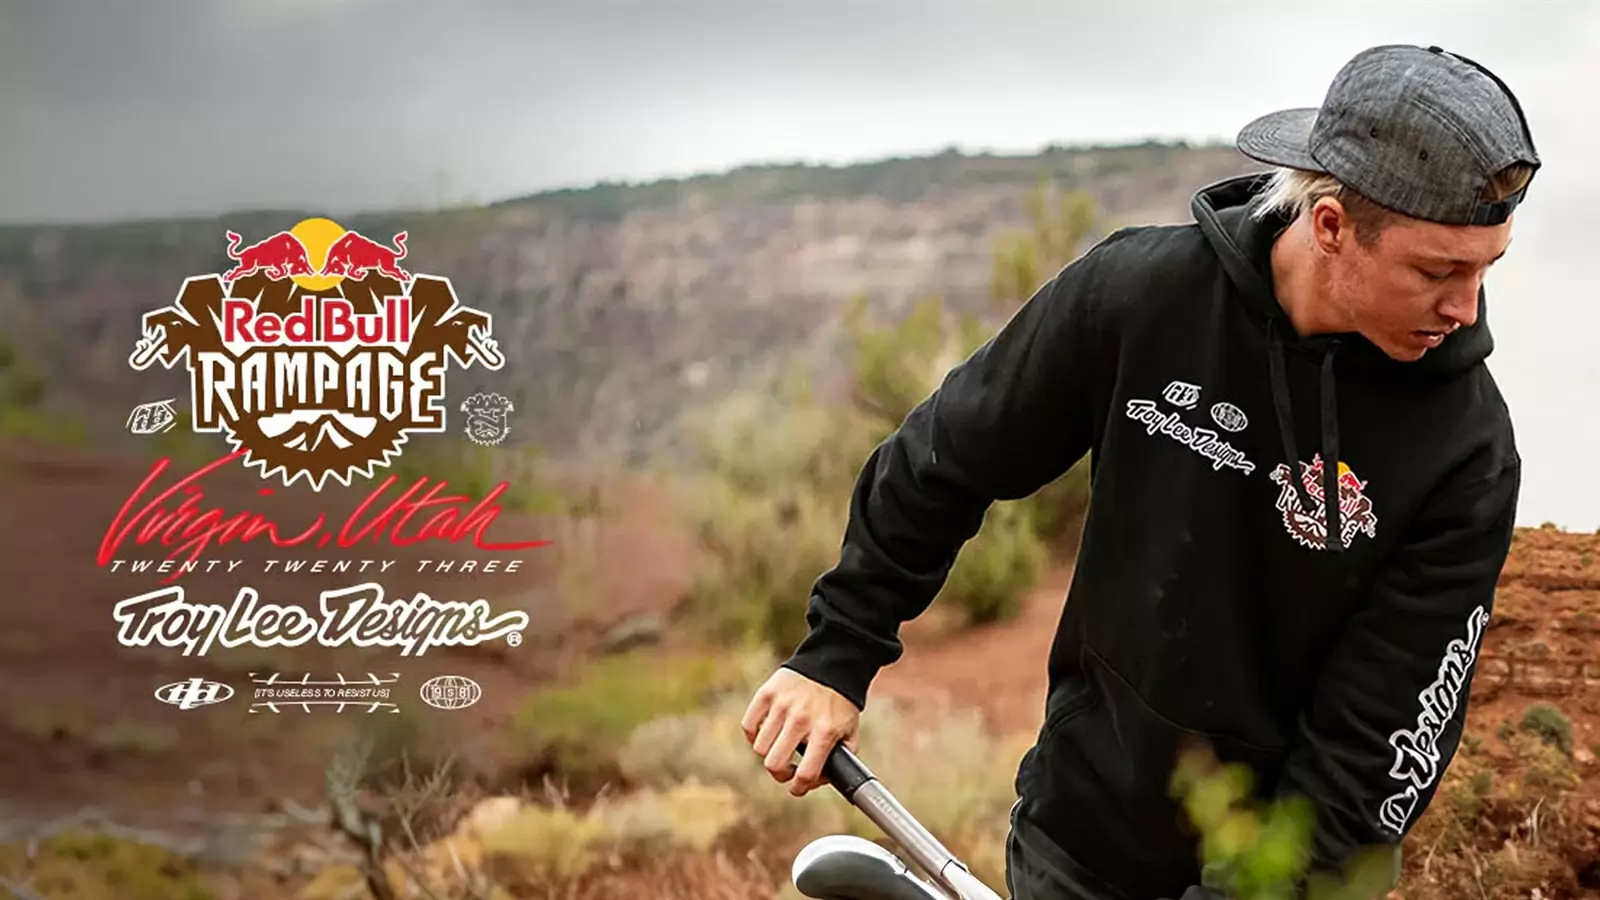 Red Bull Rampage limited edition clothing! - image